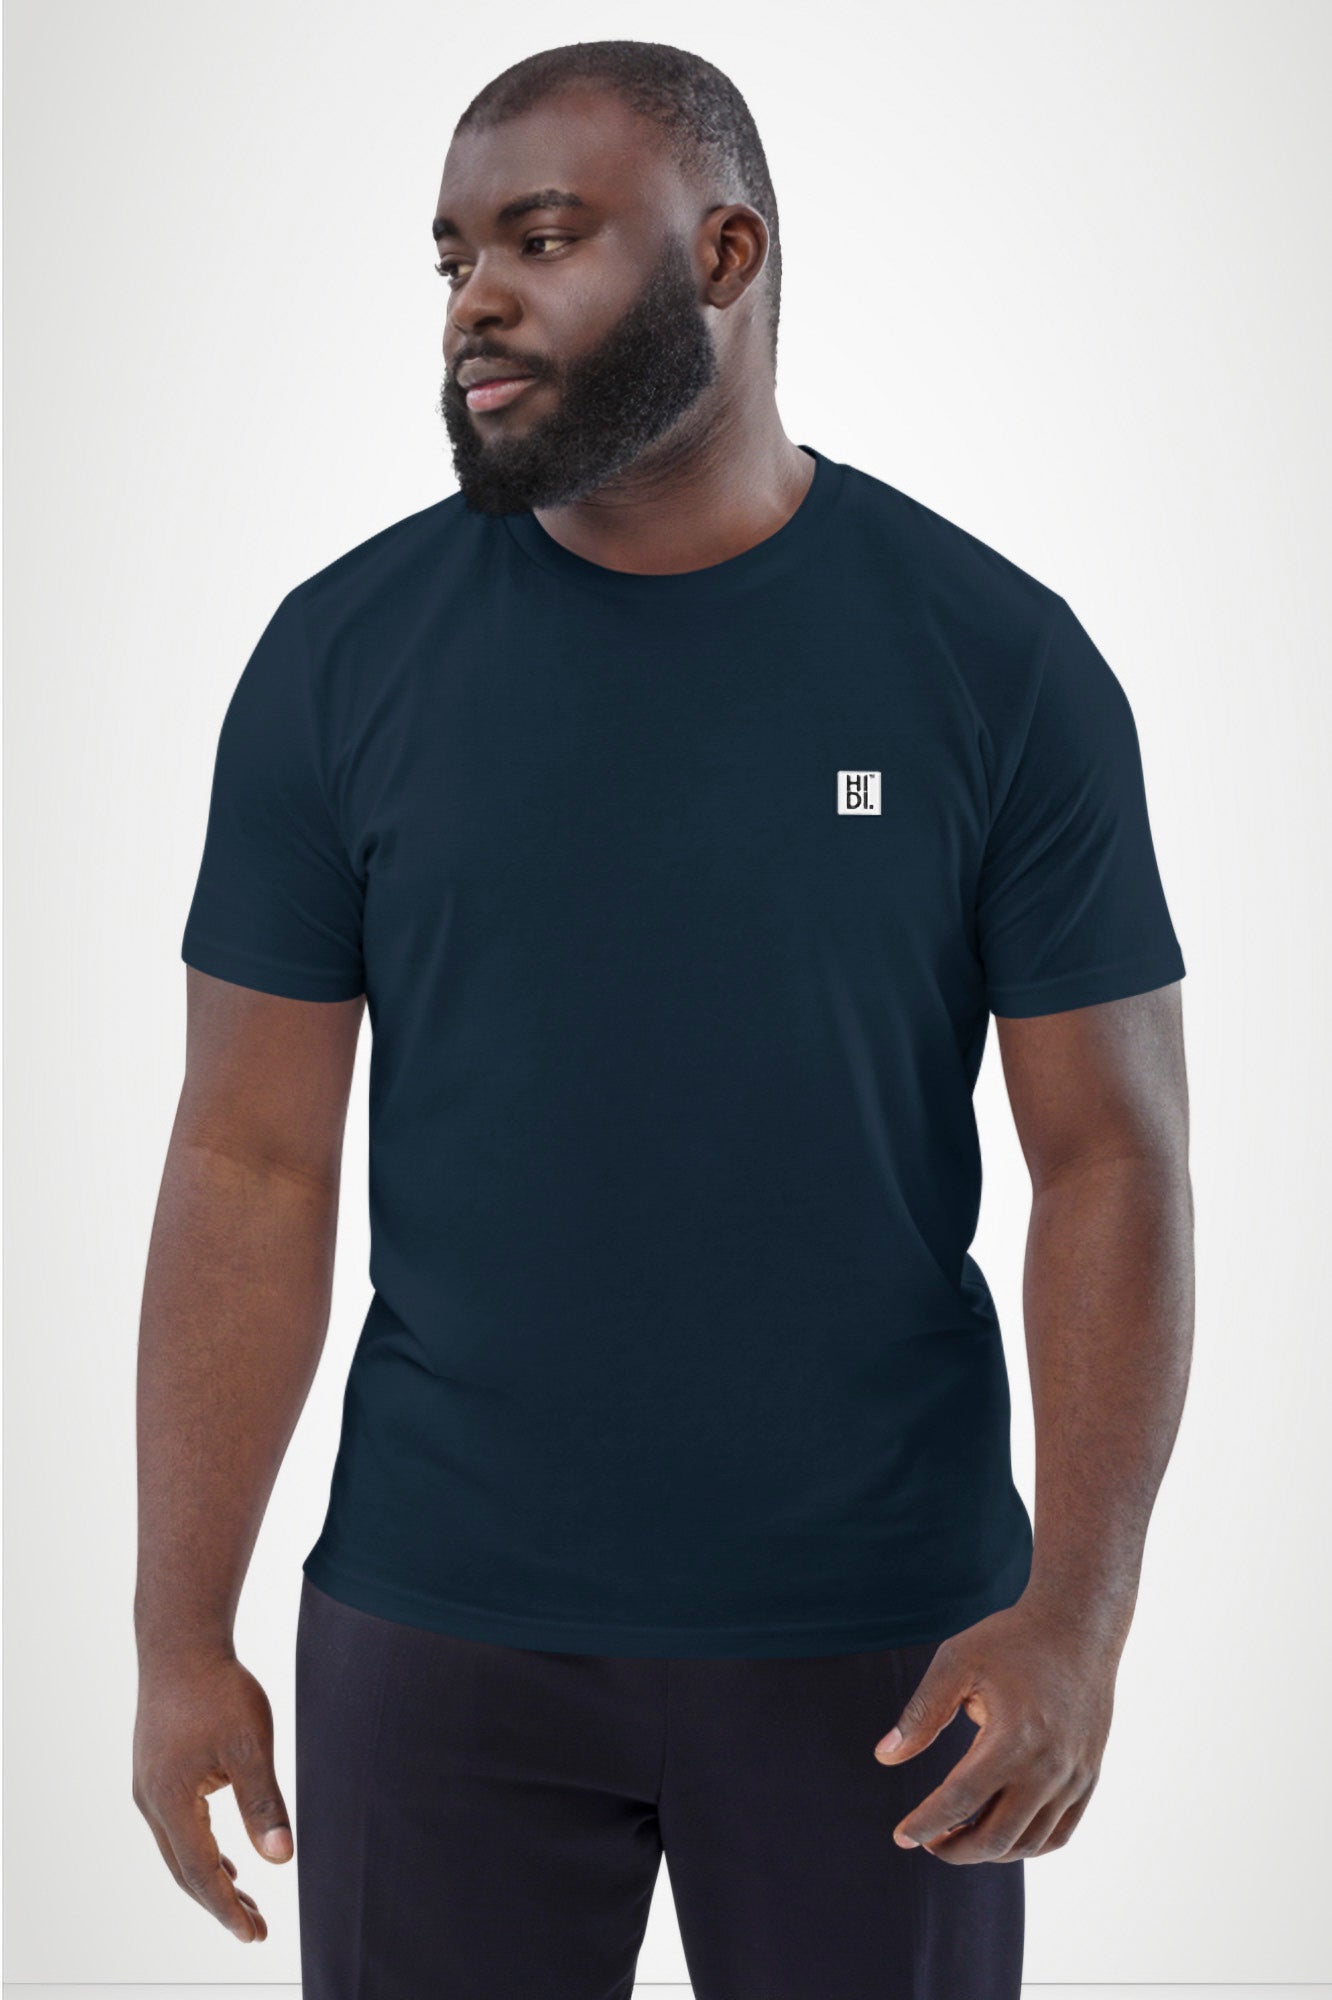 The Gravity of Life t-shirt in French Navy Shirts & Tops HITDIFFERENT